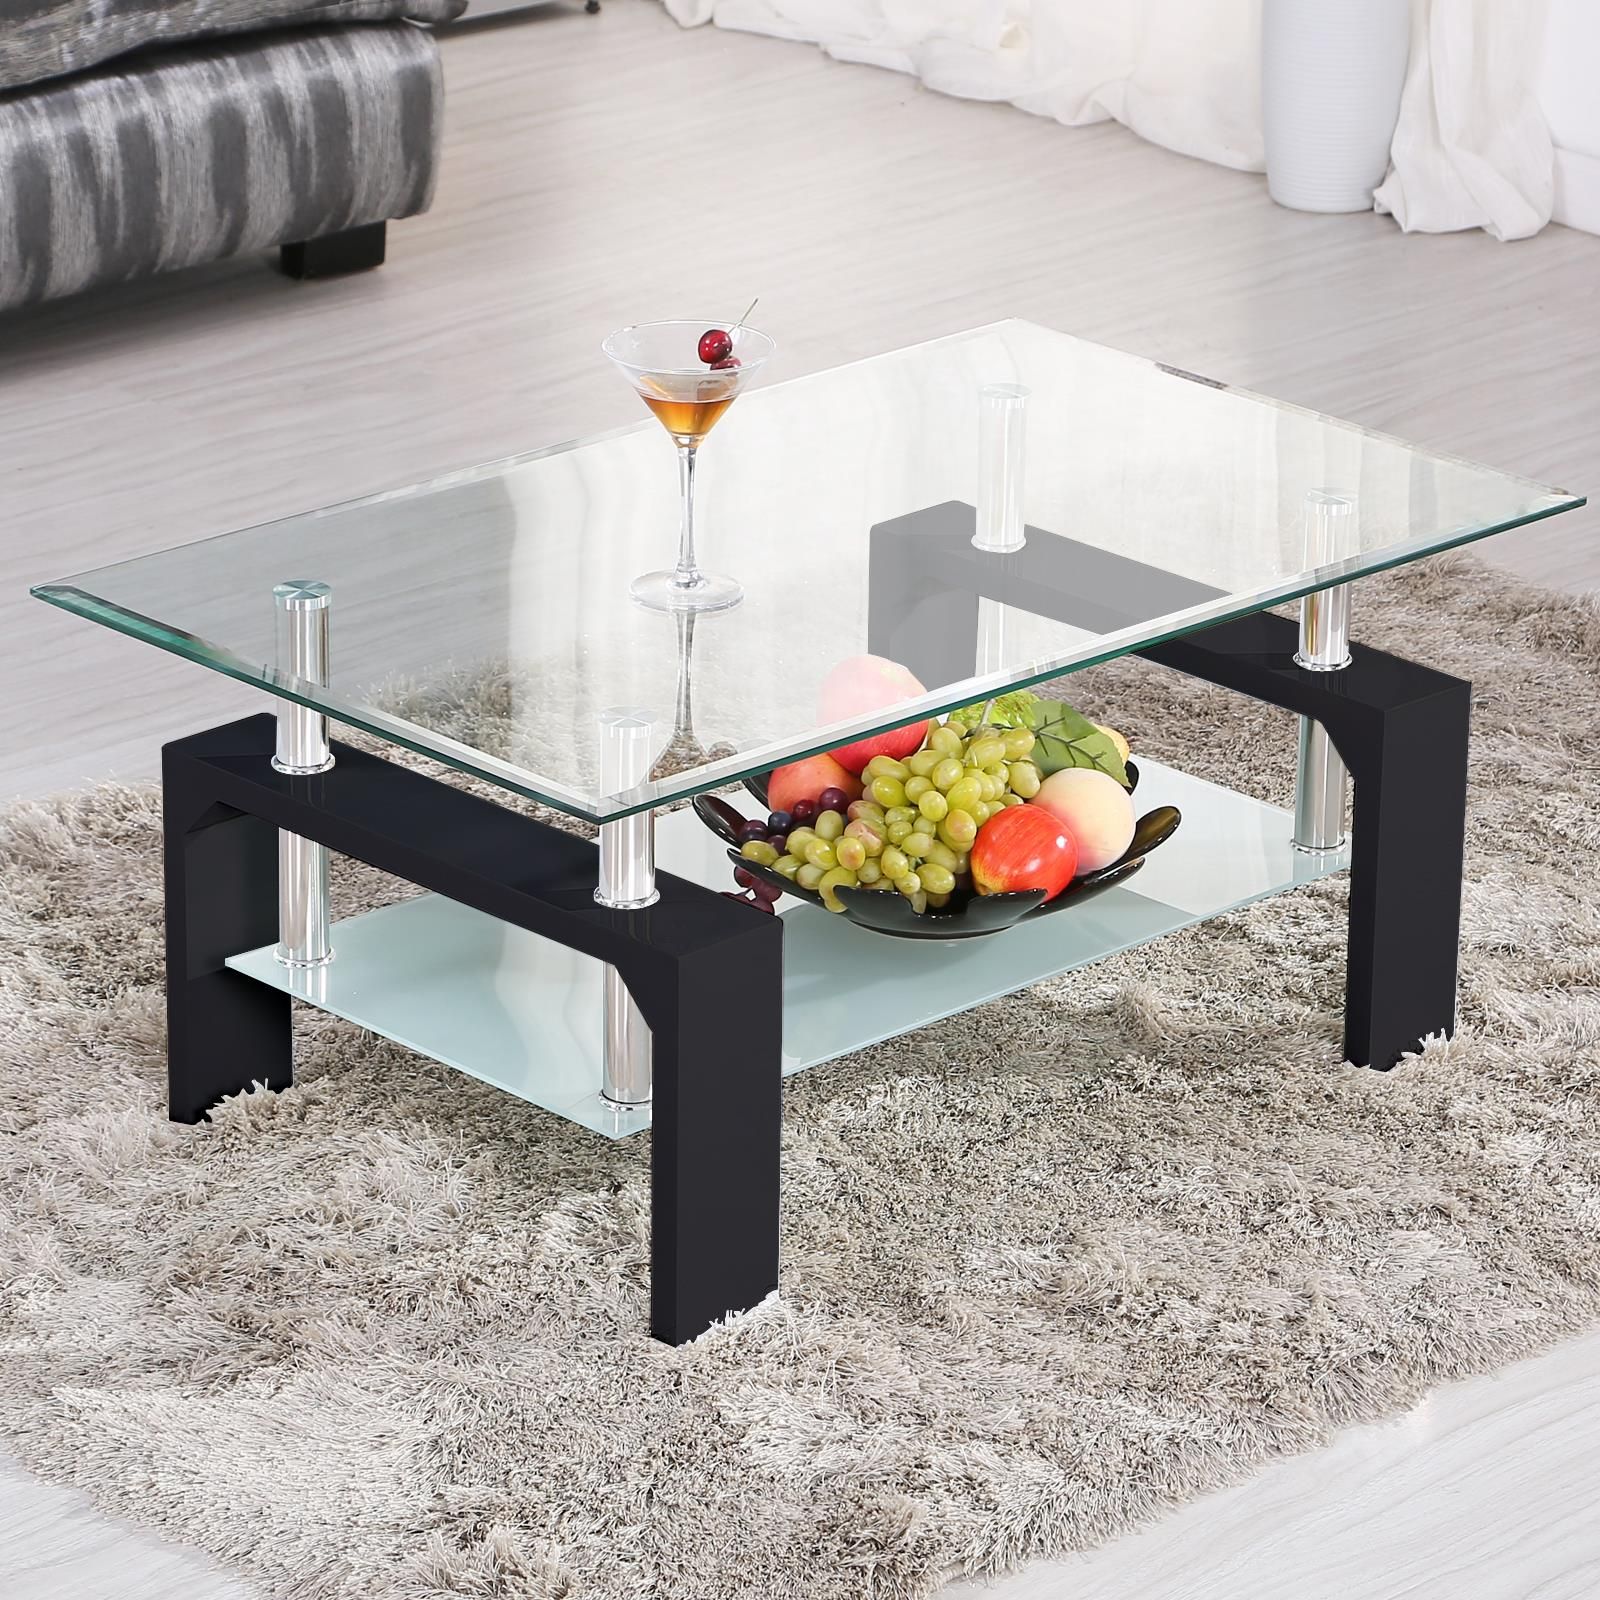 Ktaxon Rectangular Glass Coffee Table Shelf Wood Living Room Furniture Intended For Espresso Wood And Glass Top Console Tables (View 1 of 20)